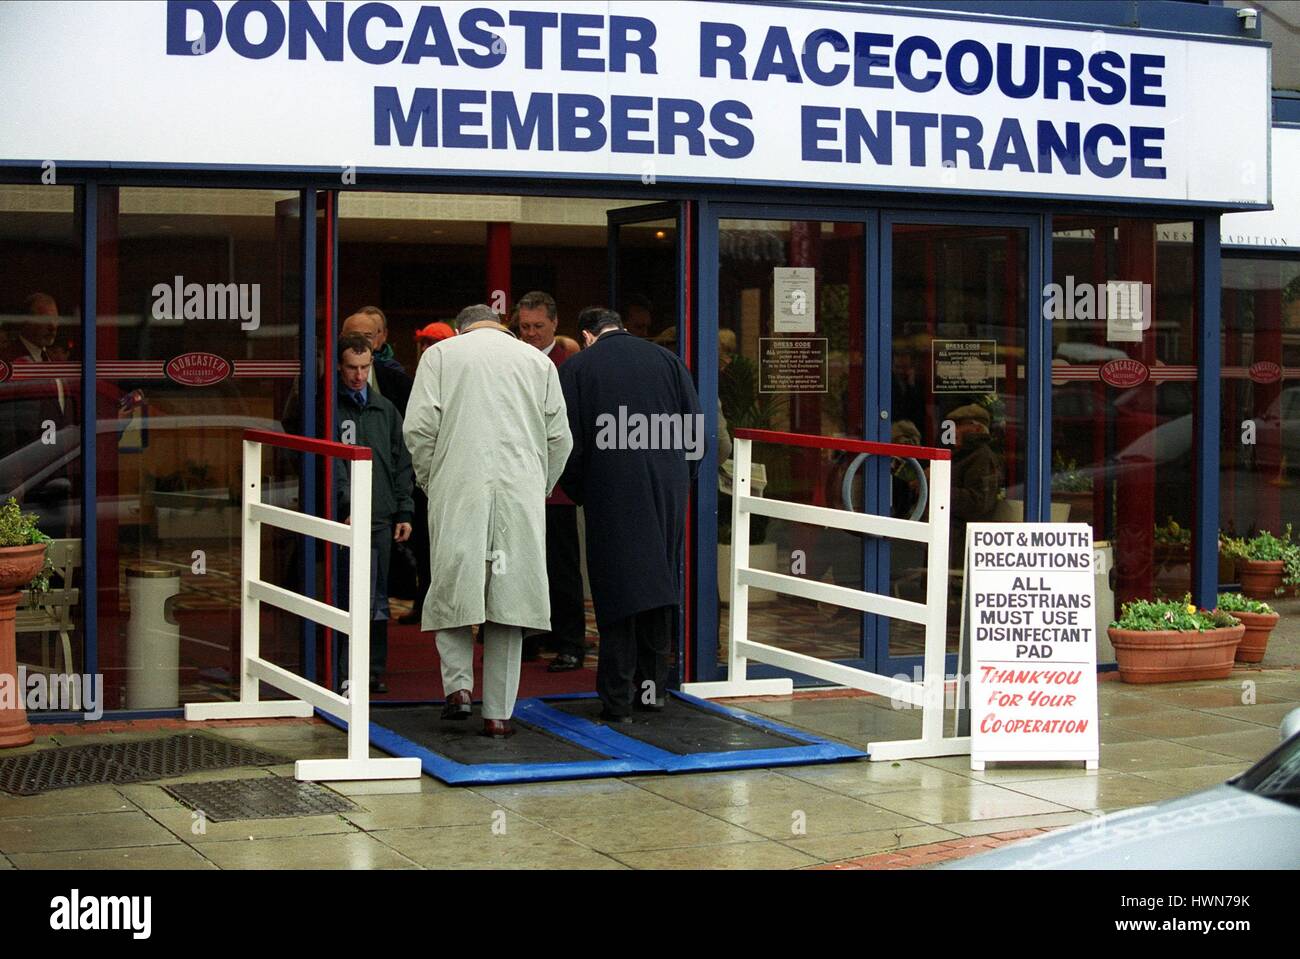 FOOT & MOUTH PRECAUTIONS DONCASTER RACECOURSE DONCASTER DONCASTER RACECOURSE 08 May 2001 Stock Photo